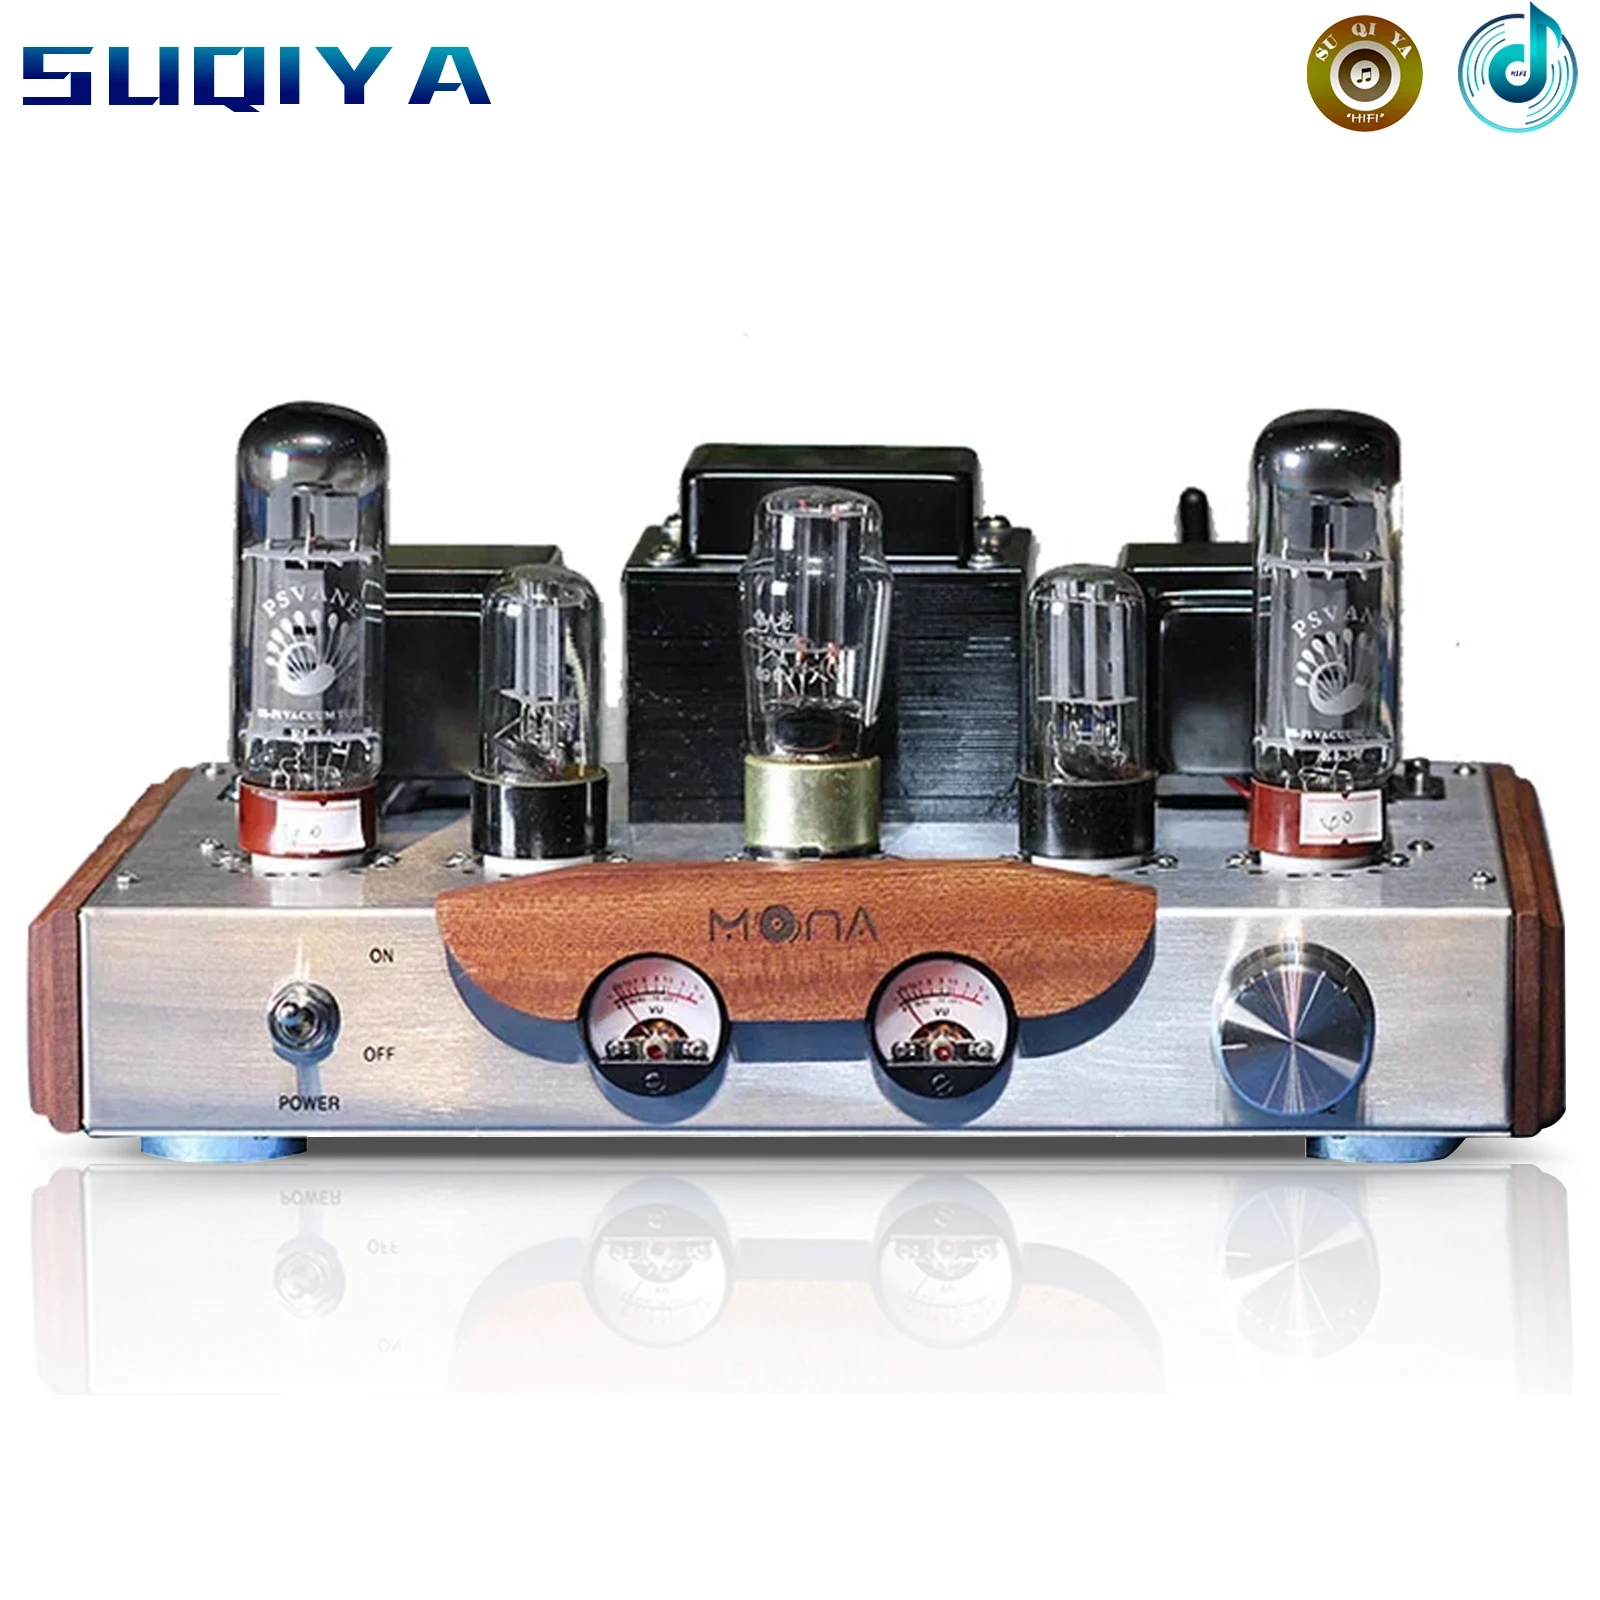 

Himing Mona Rivlas EL34 Tube Amplifier HIFI EXQUIS Rivals Wood Version Integrated Single-Ended Handmade Amp MN34W